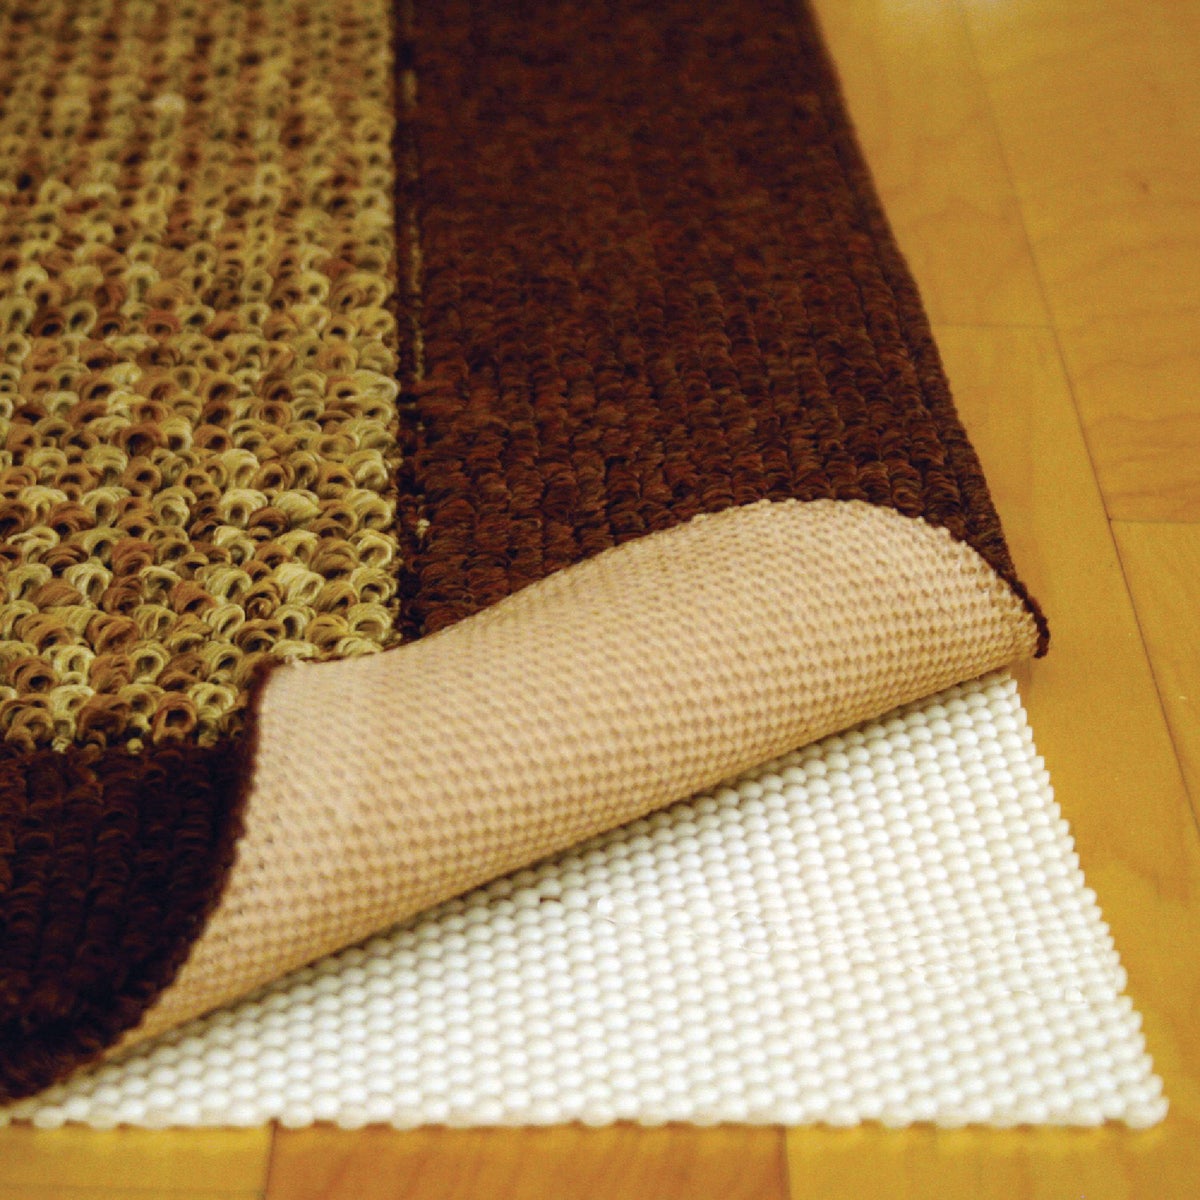 Mohawk Home 1 Ft. 8 In. x 2 Ft. 8 In. Better Quality Nonslip Rug Pad